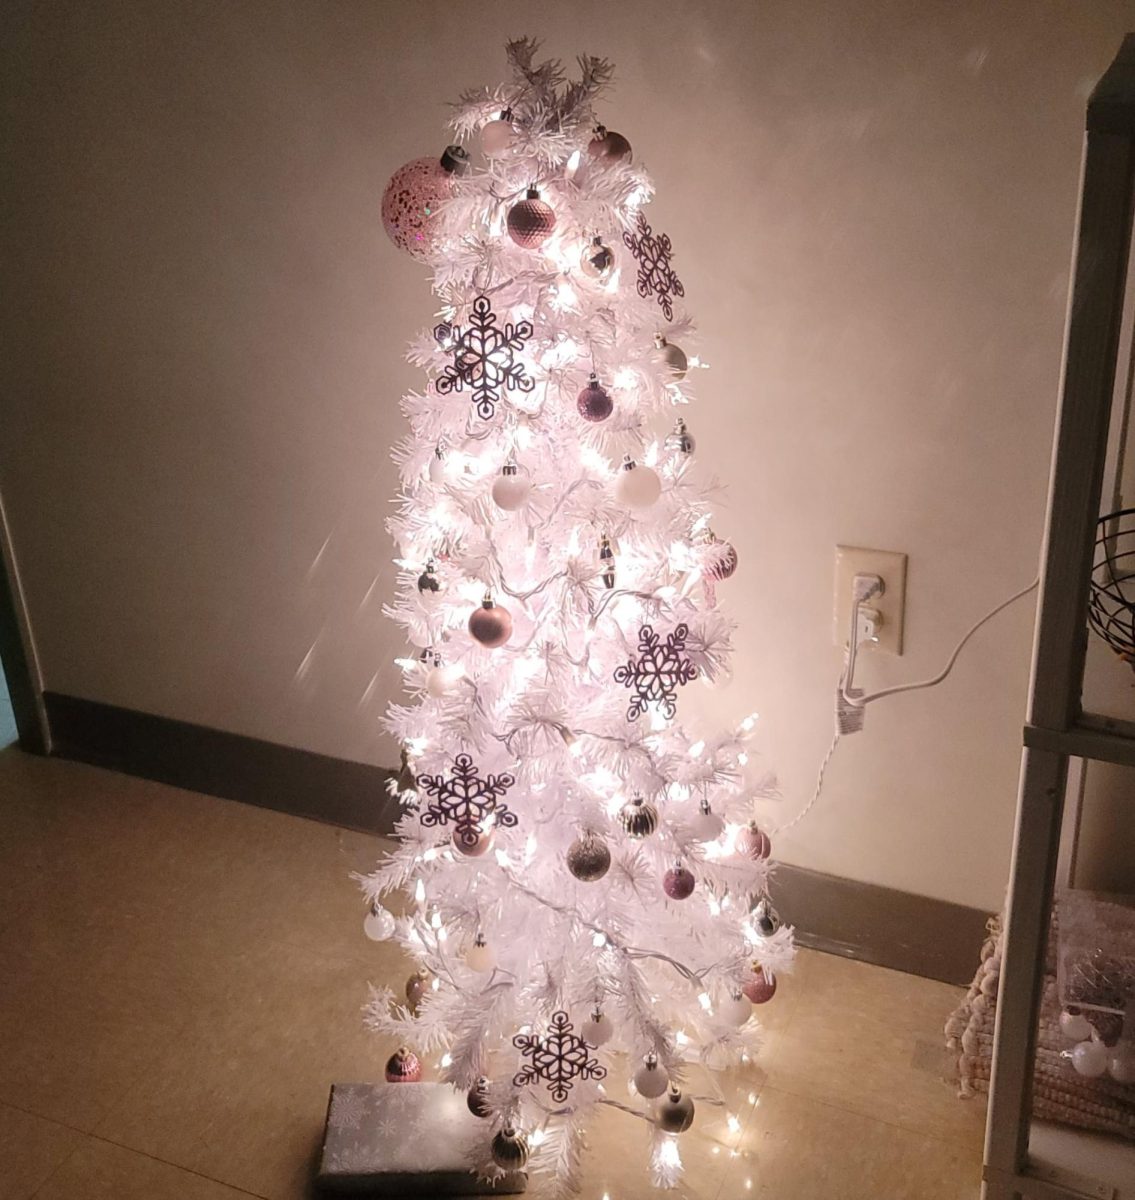 A+little+Christmas+tree+is+more+than+enough+to+light+up+the+dorm.+